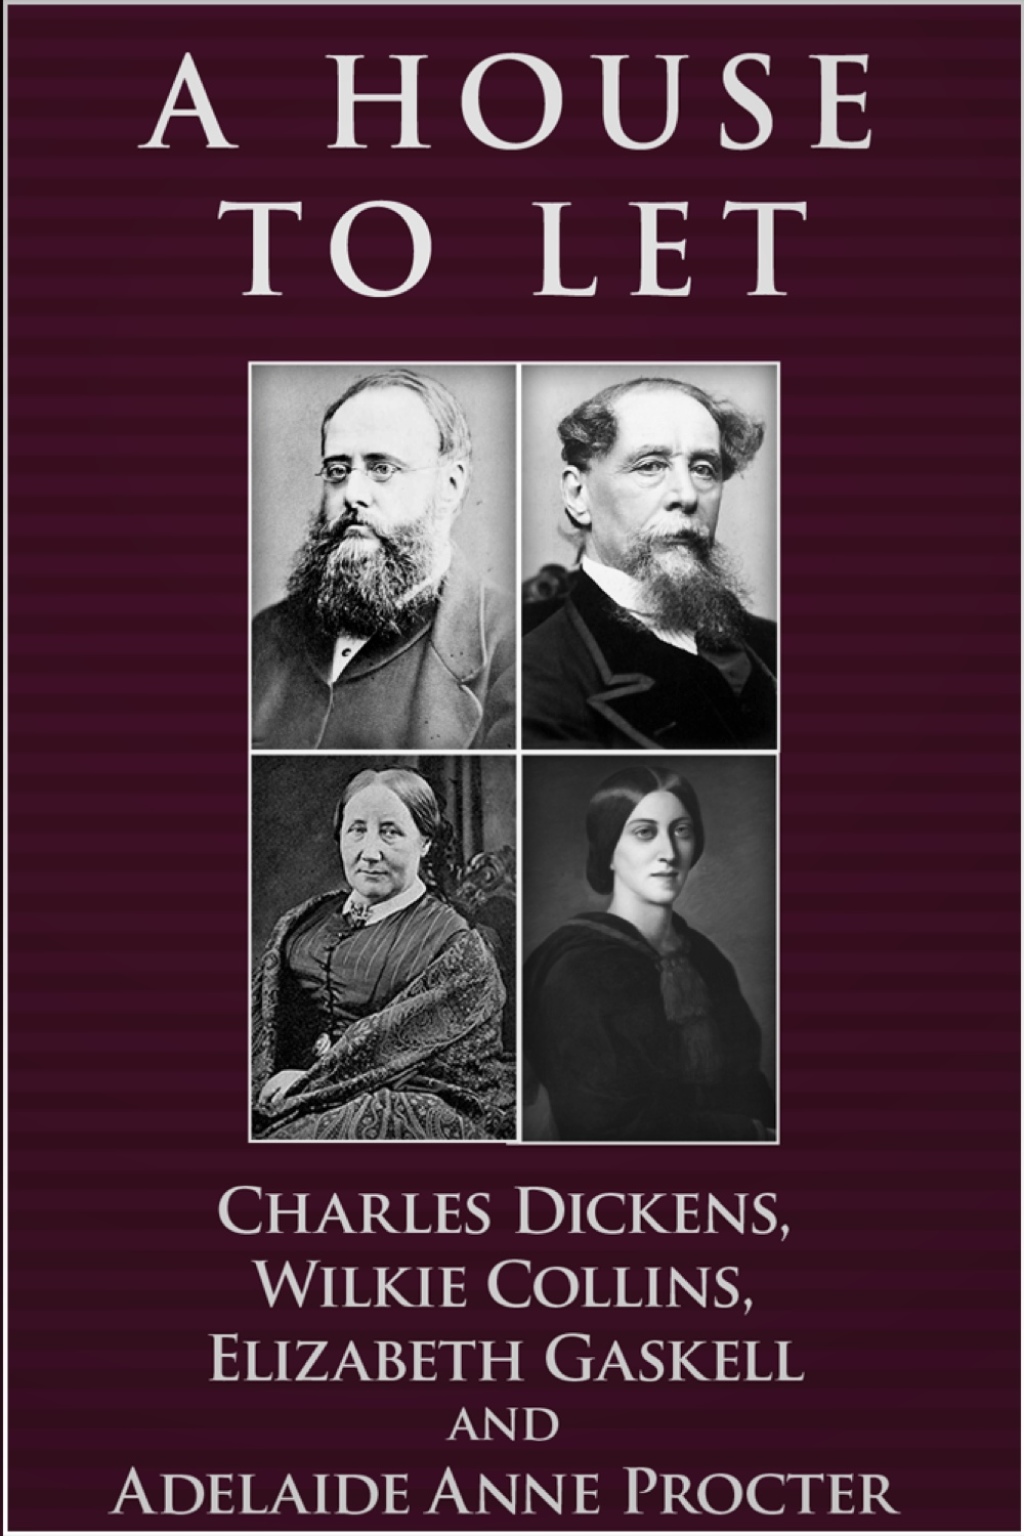 A House to Let (eBook) - Charles Dickens,  Wilkie Collins,  Elizabeth Gaskell,  Adelaide Ann Procter